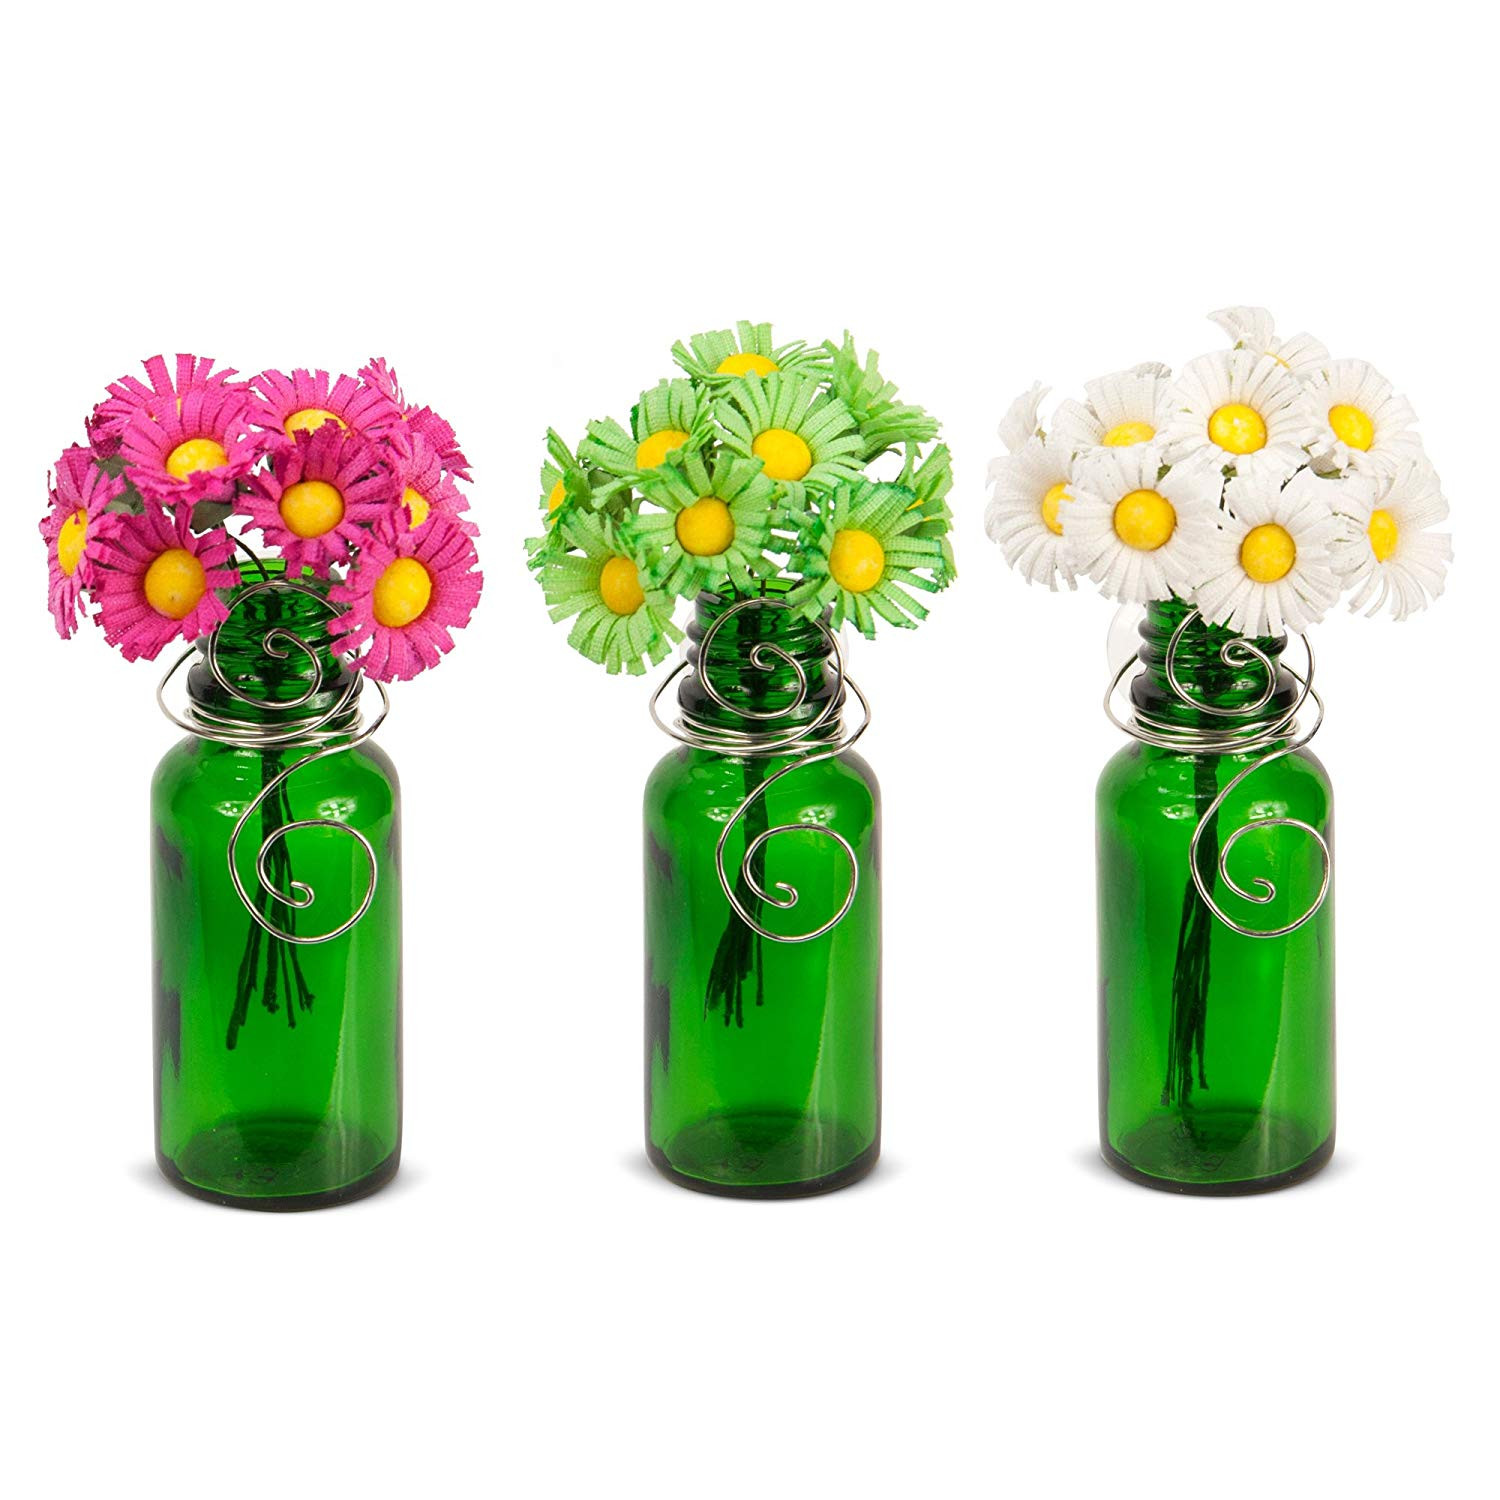 16 Fashionable Small Plastic Flower Vases 2024 free download small plastic flower vases of amazon com vazzini mini vase bouquet suction cup bud bottle for amazon com vazzini mini vase bouquet suction cup bud bottle holder with flowers decorative for w